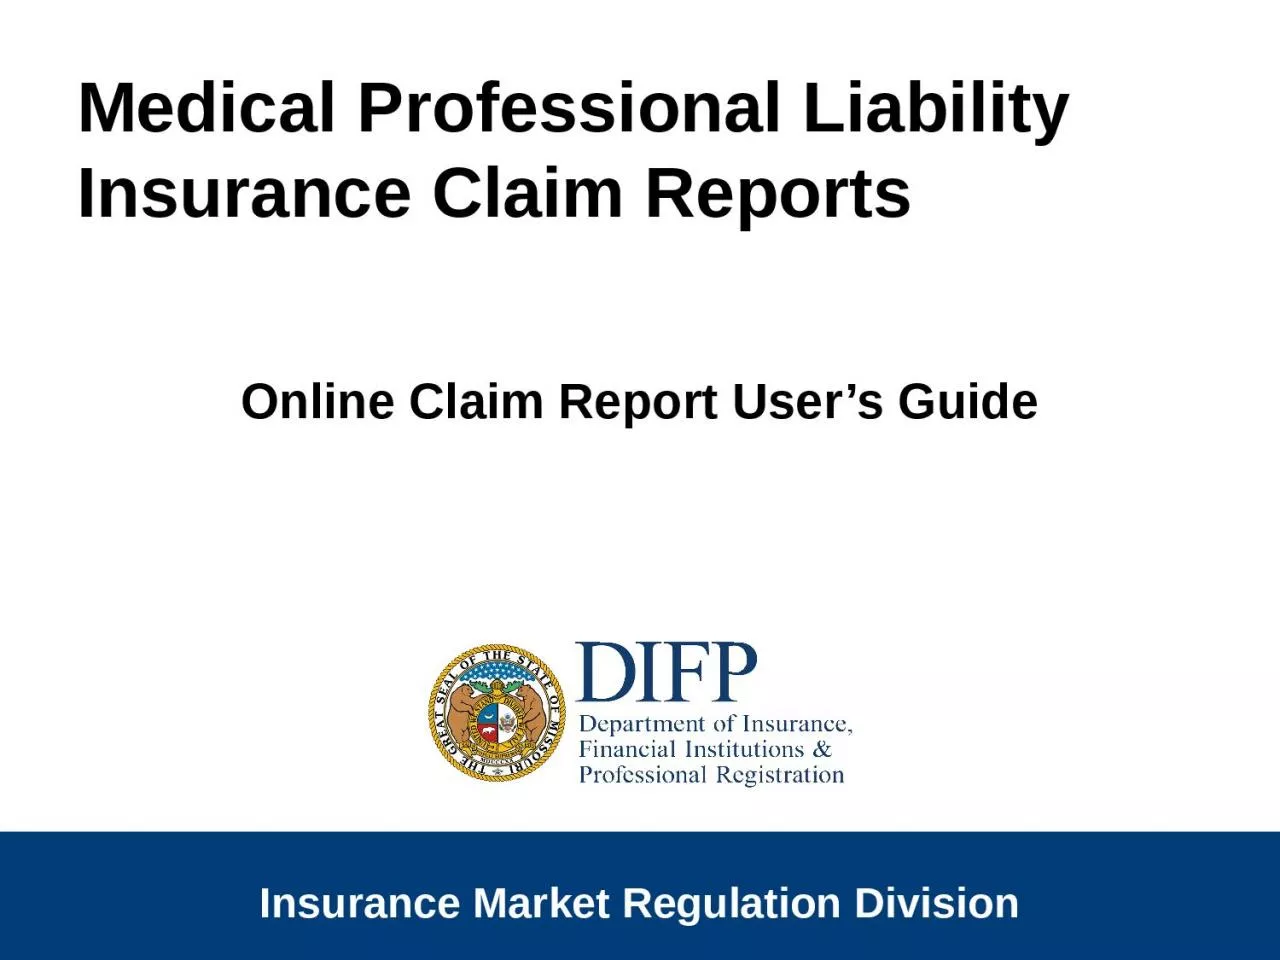 Medical Professional Liability Insurance Claim Reports